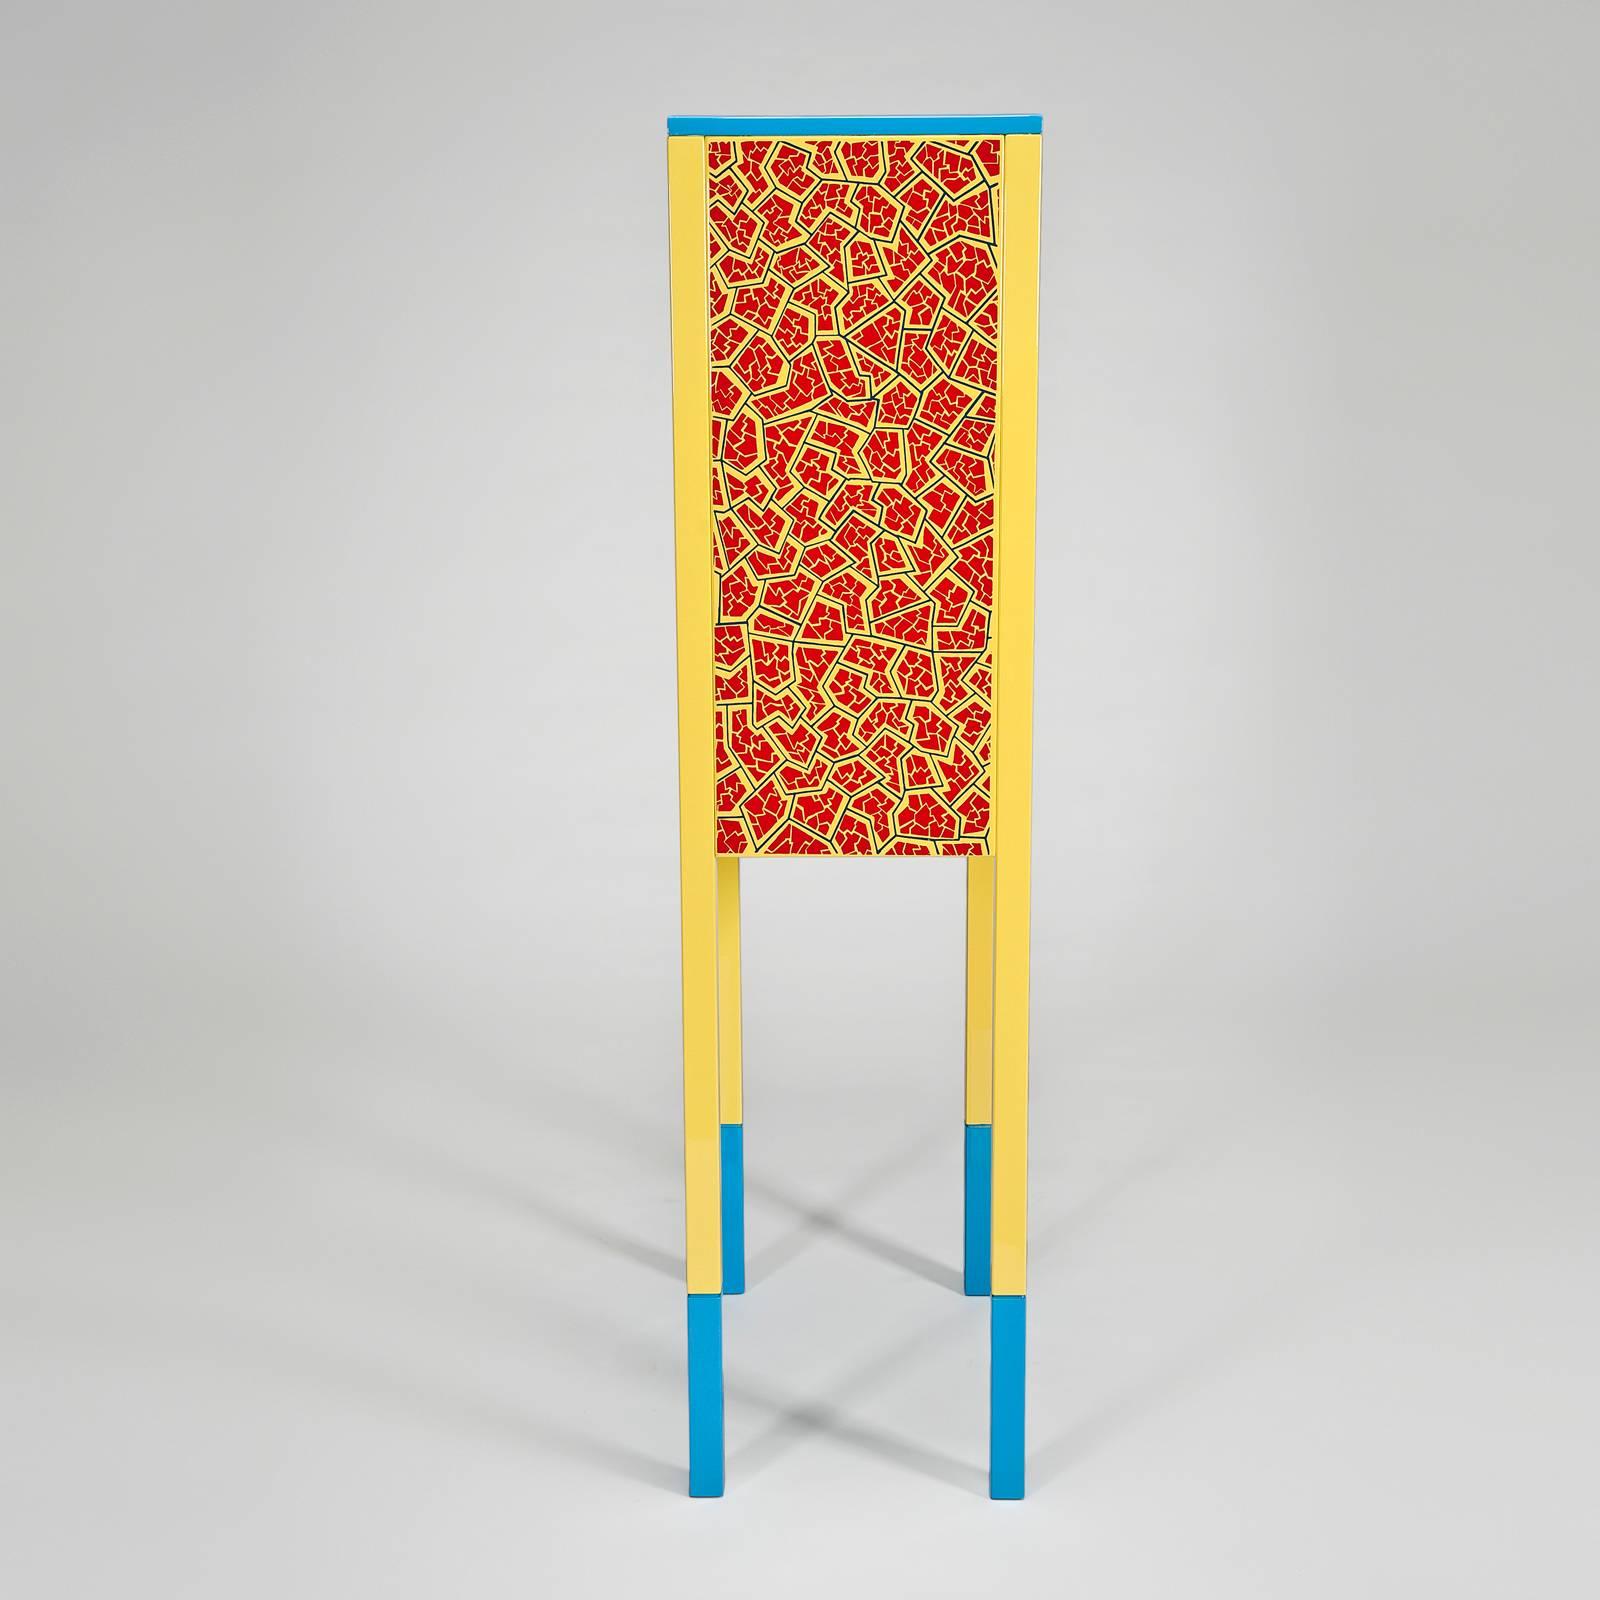 Glass front cabinet with red lacquered doors and yellow trim. The yellow legs are tipped in blue to match the blue at the top of the cabinet. The Sowden- designed pattern on the sides is stenciled in red and blue on the yellow background. The grey